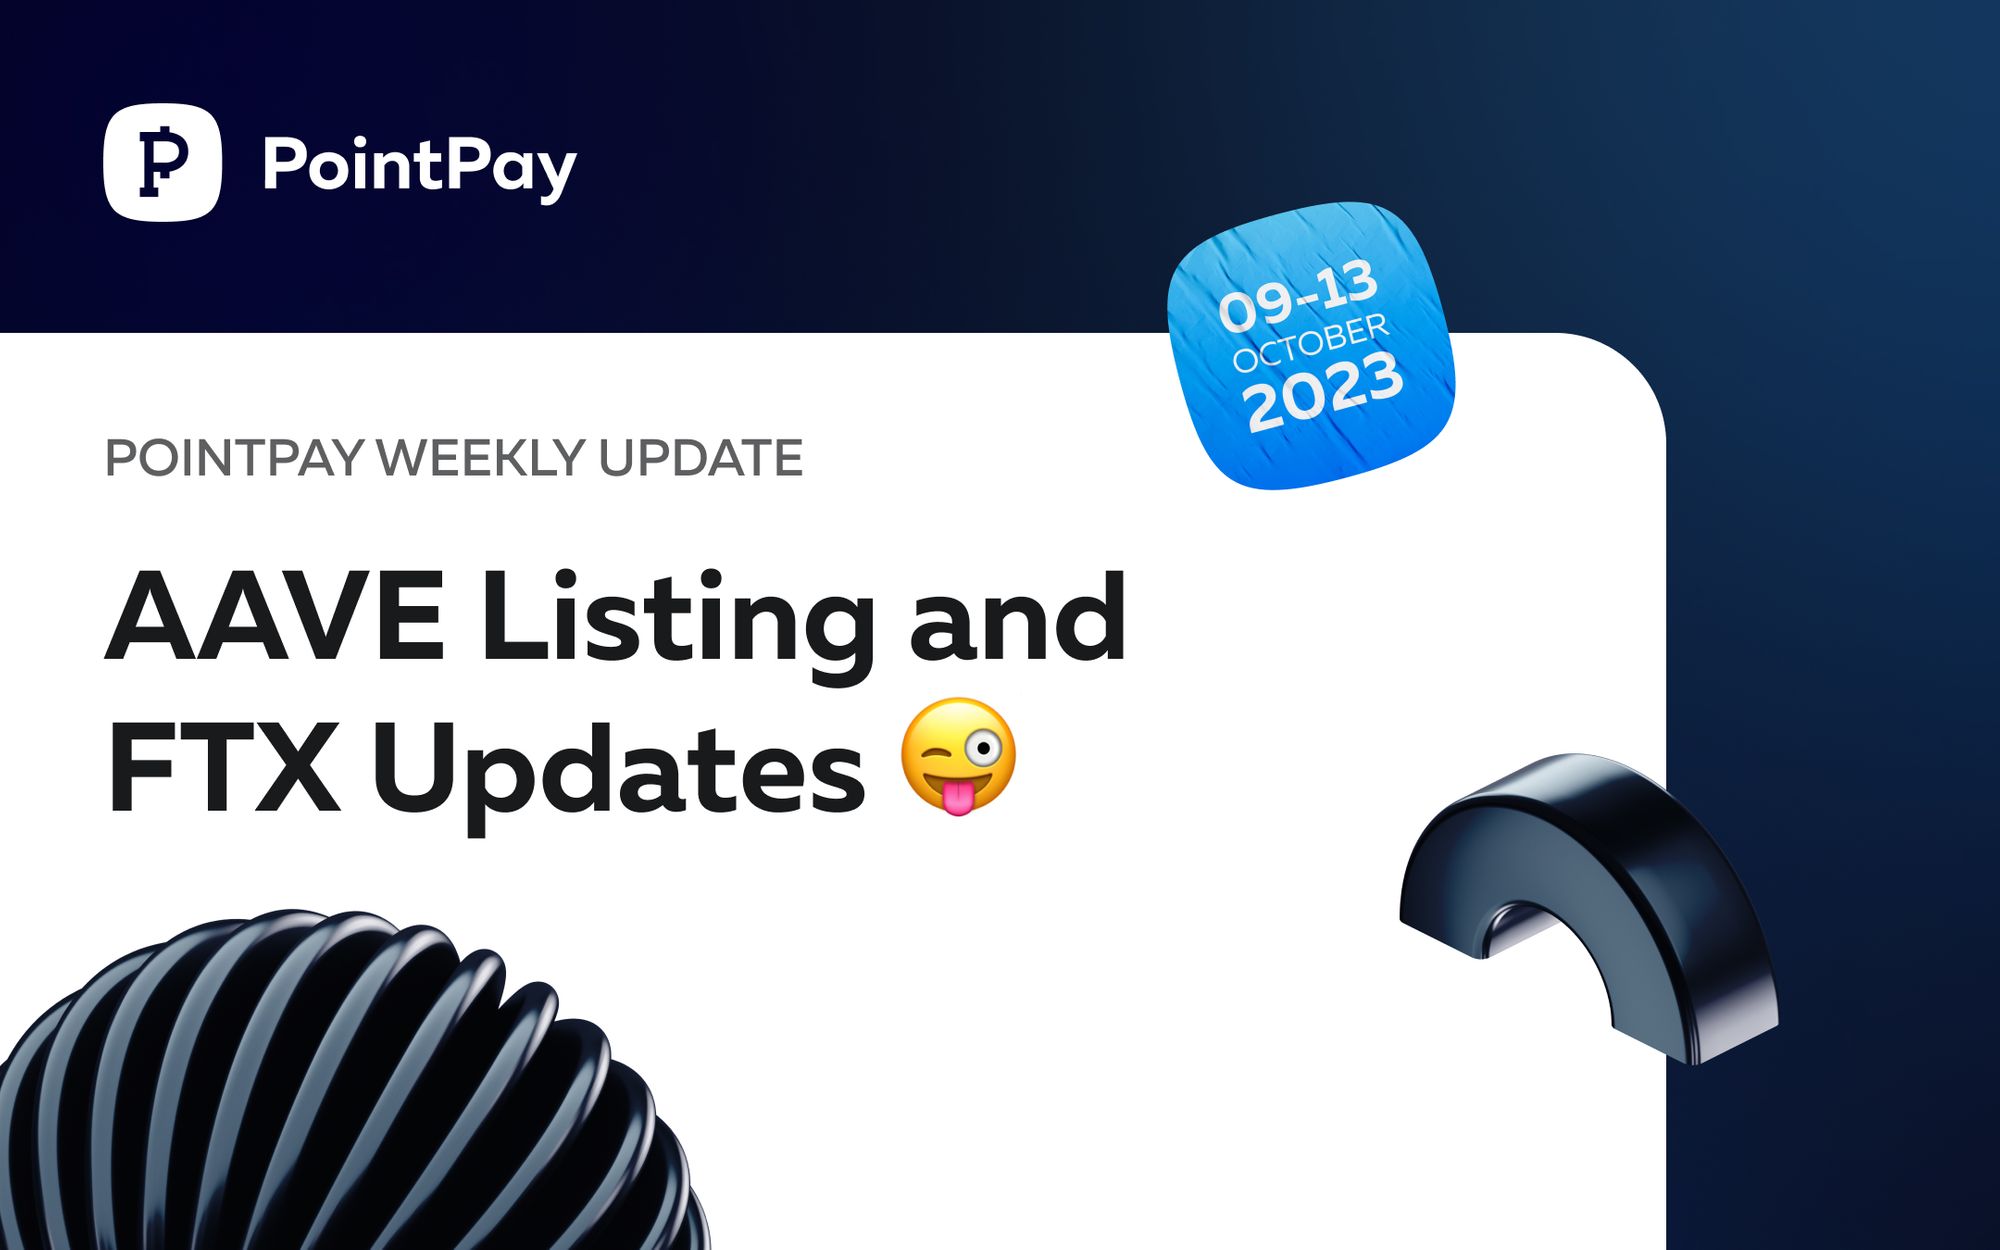 PointPay Weekly Update (9 - 13 October 2023)